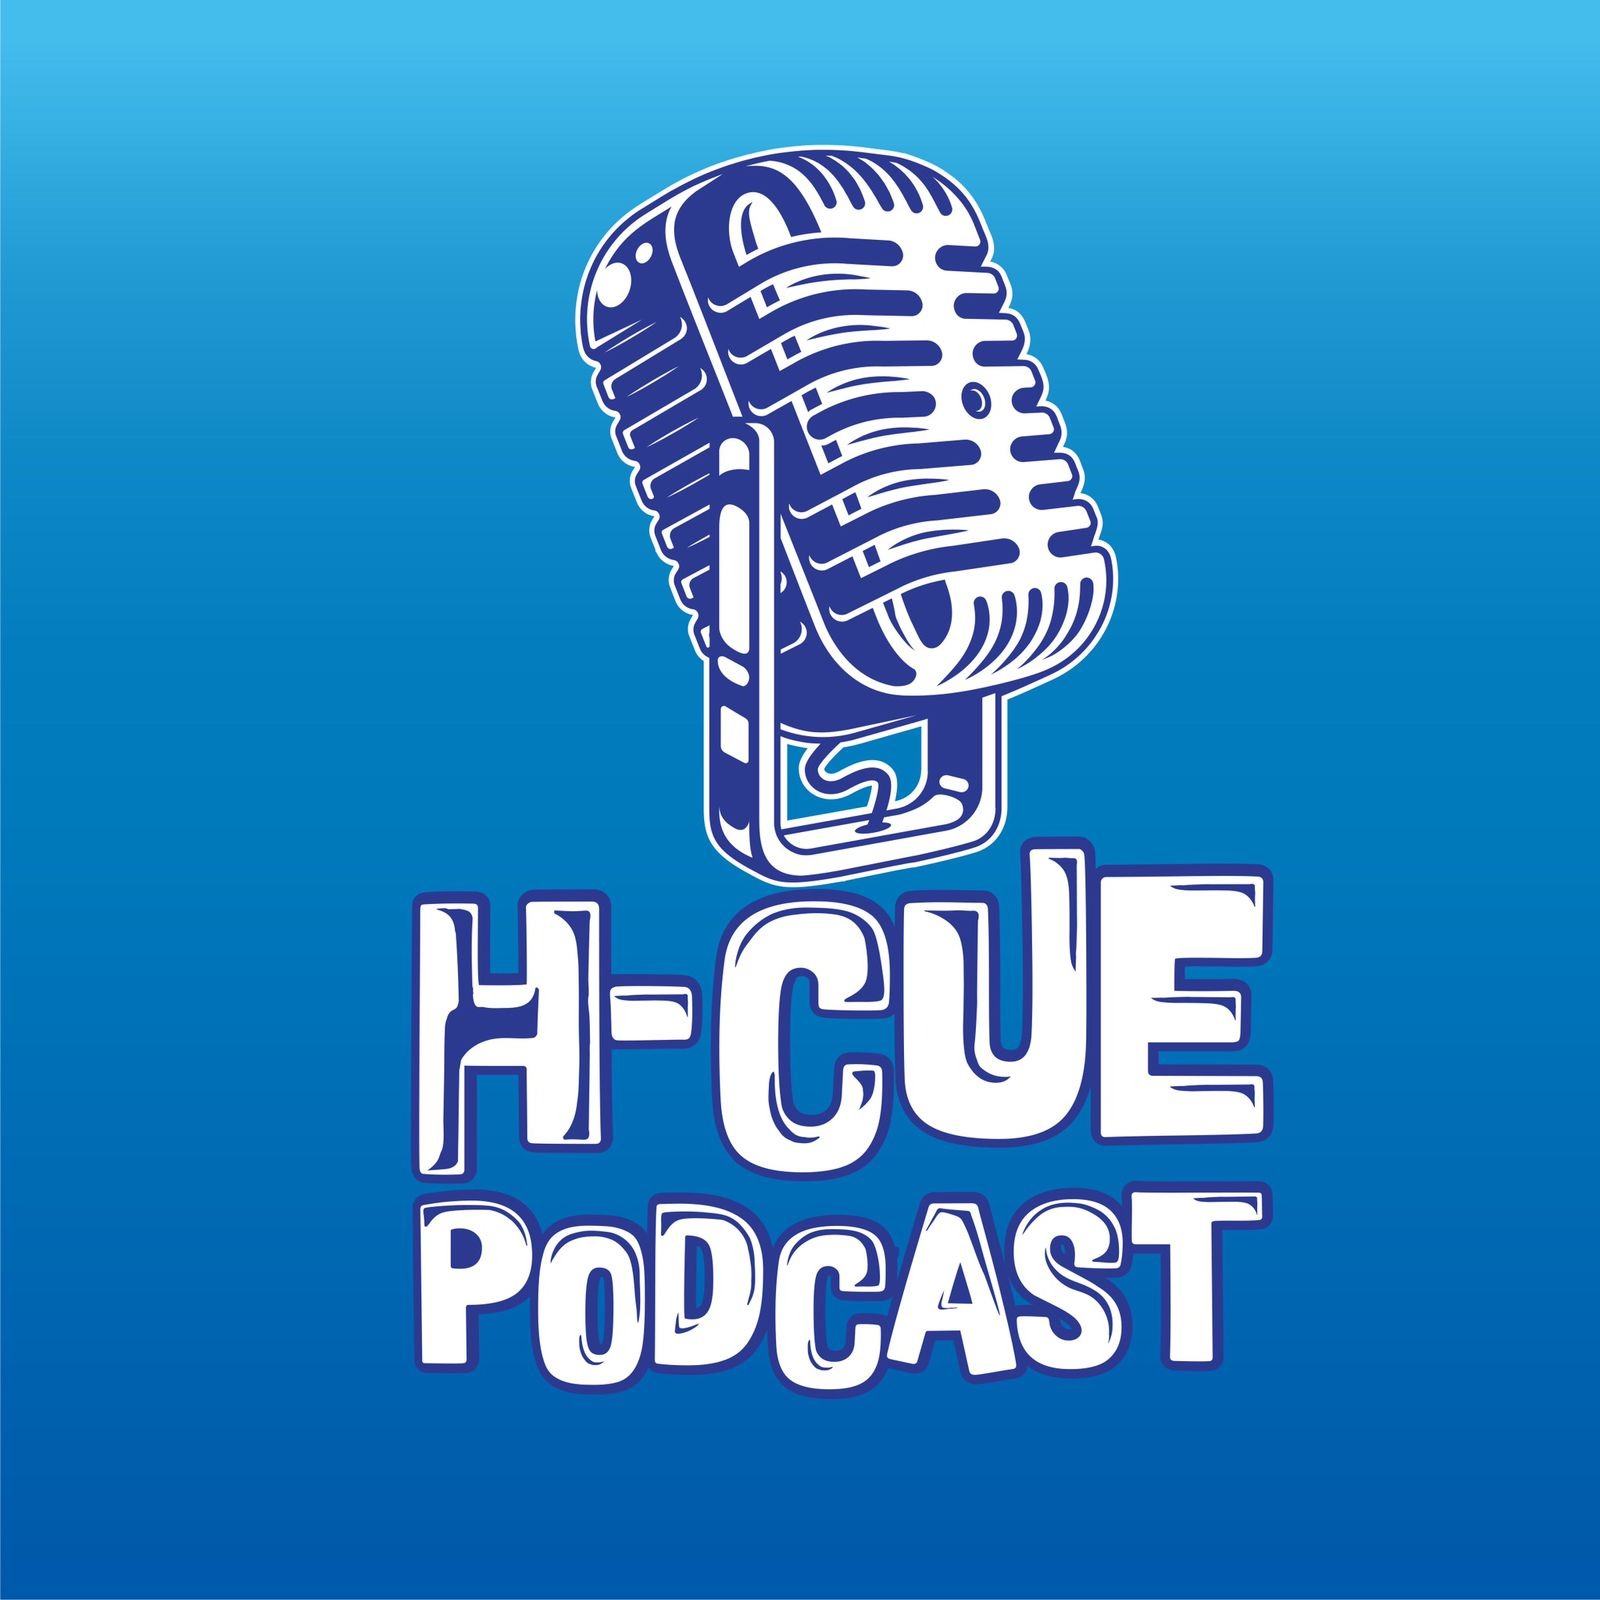 H-Cue Podcast